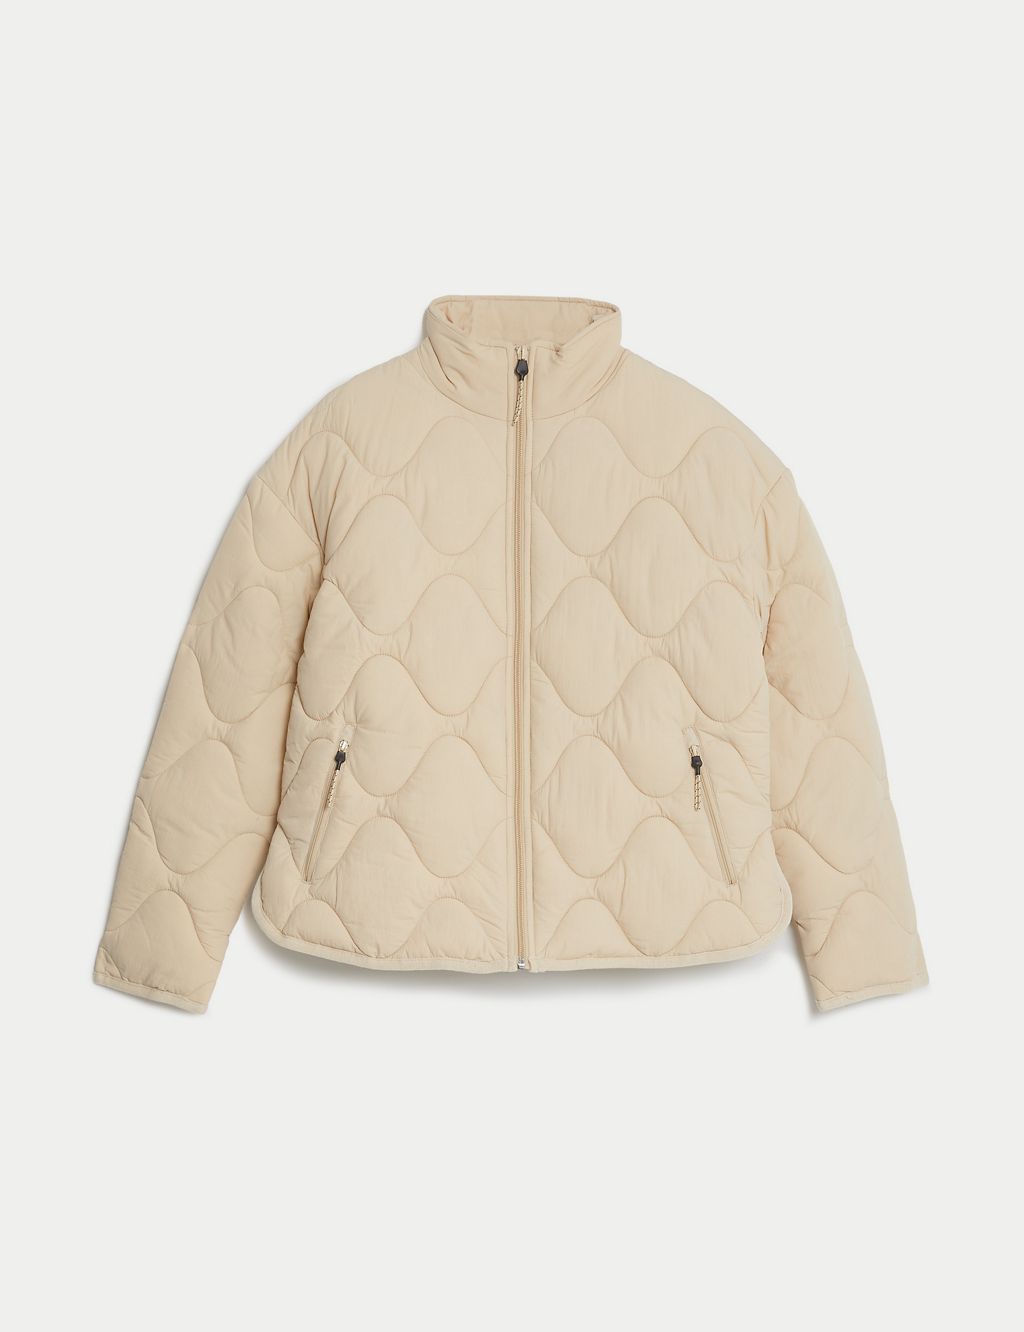 Packaway Quilted Funnel Neck Jacket 1 of 6